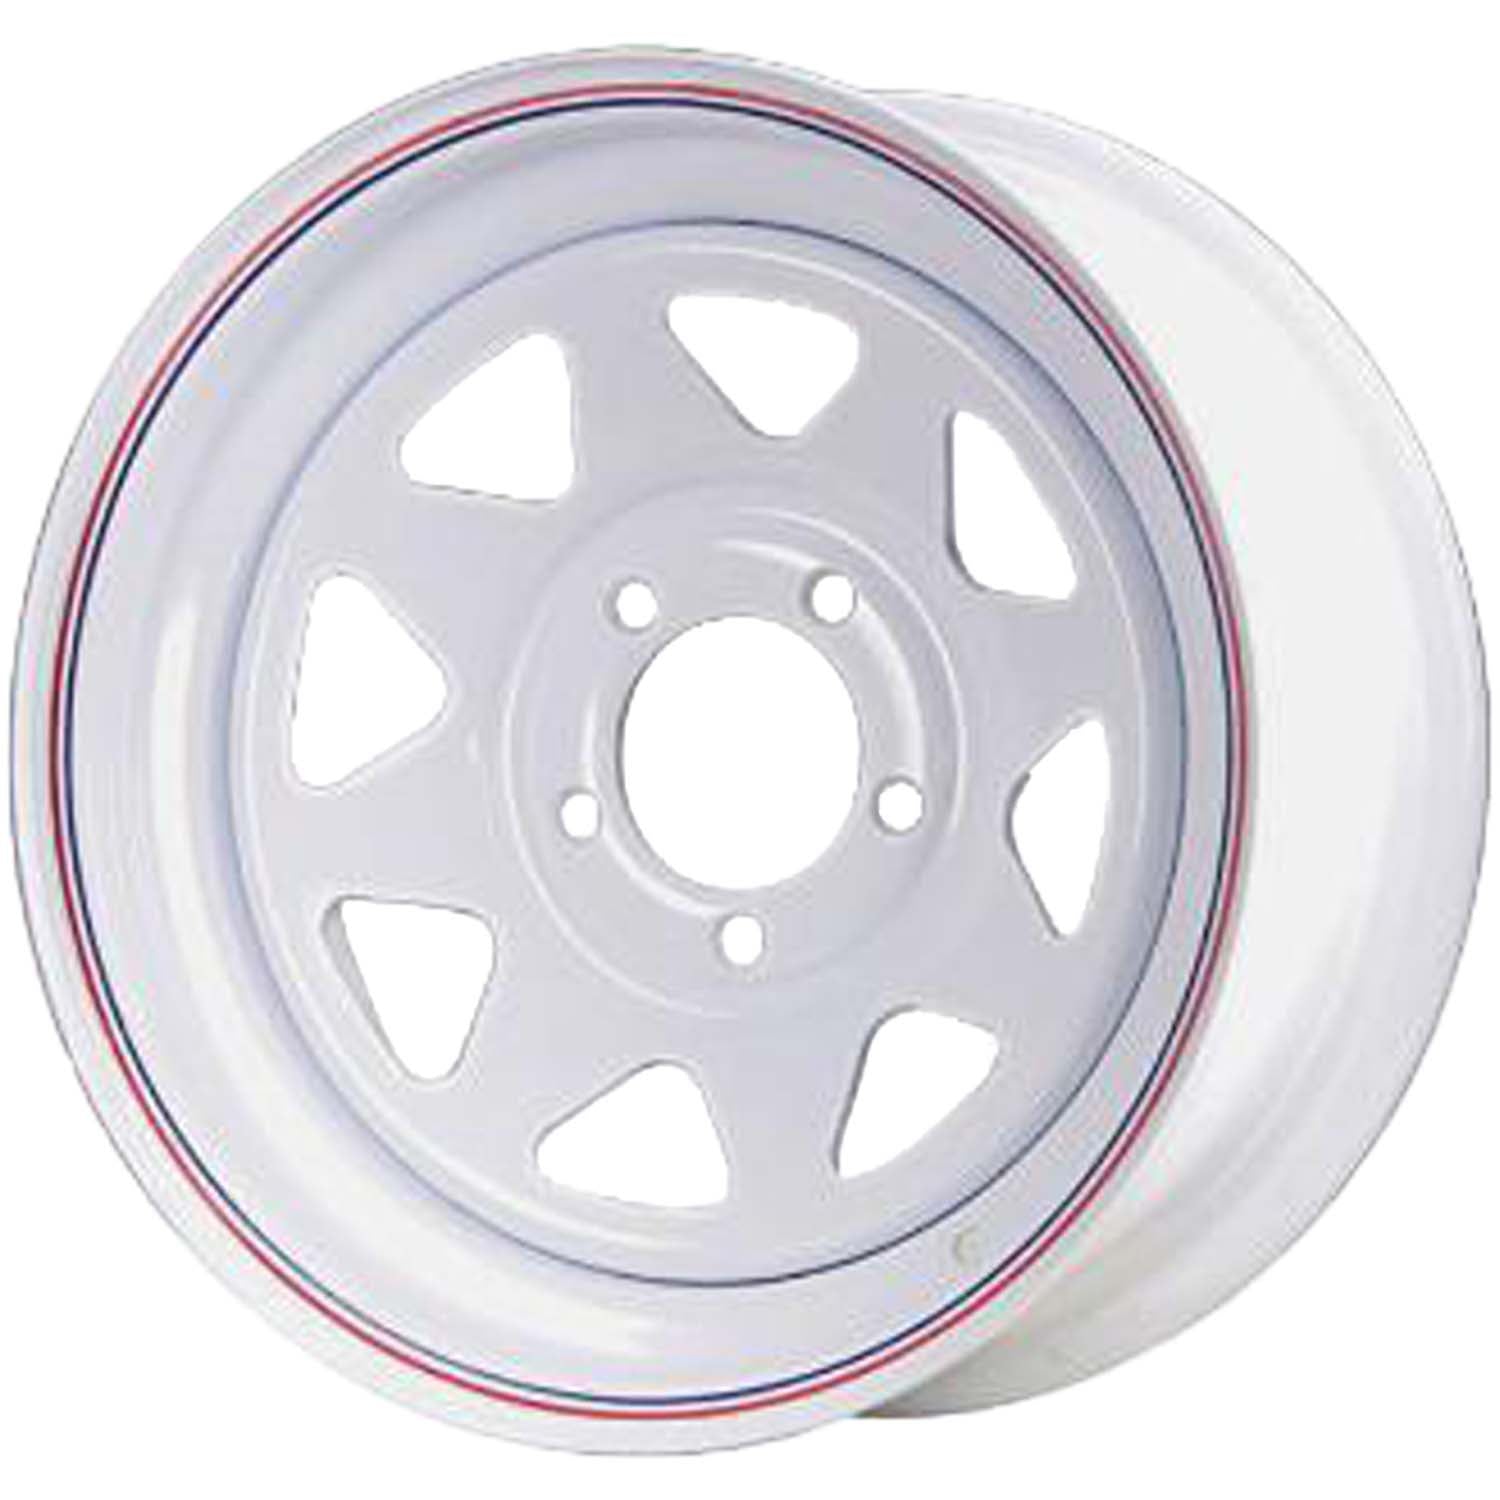 12x4 5 On 4.5 Spoked Steel Trailer Wheel - White with Pin Stripes